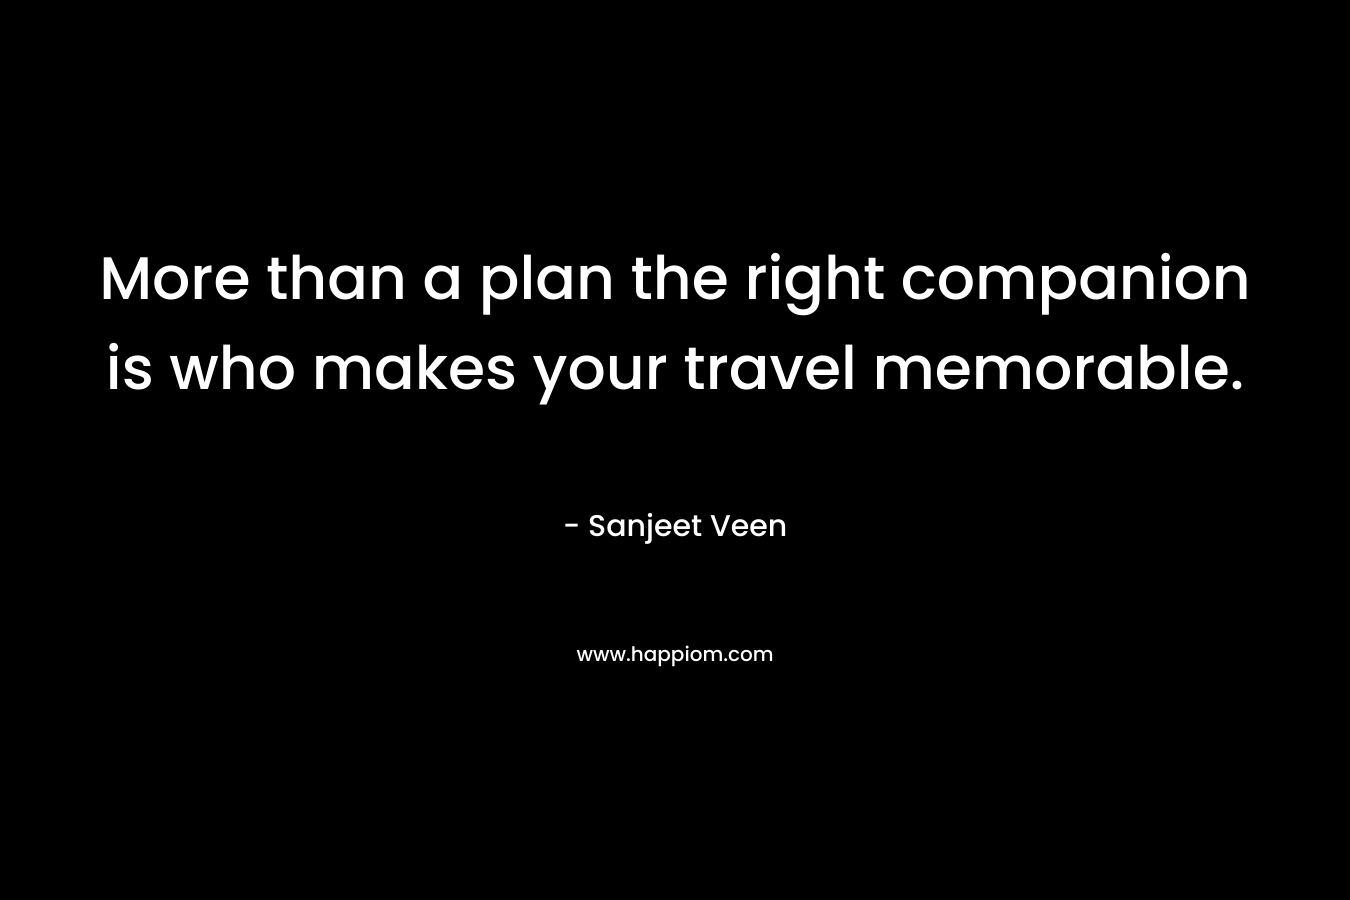 More than a plan the right companion is who makes your travel memorable.